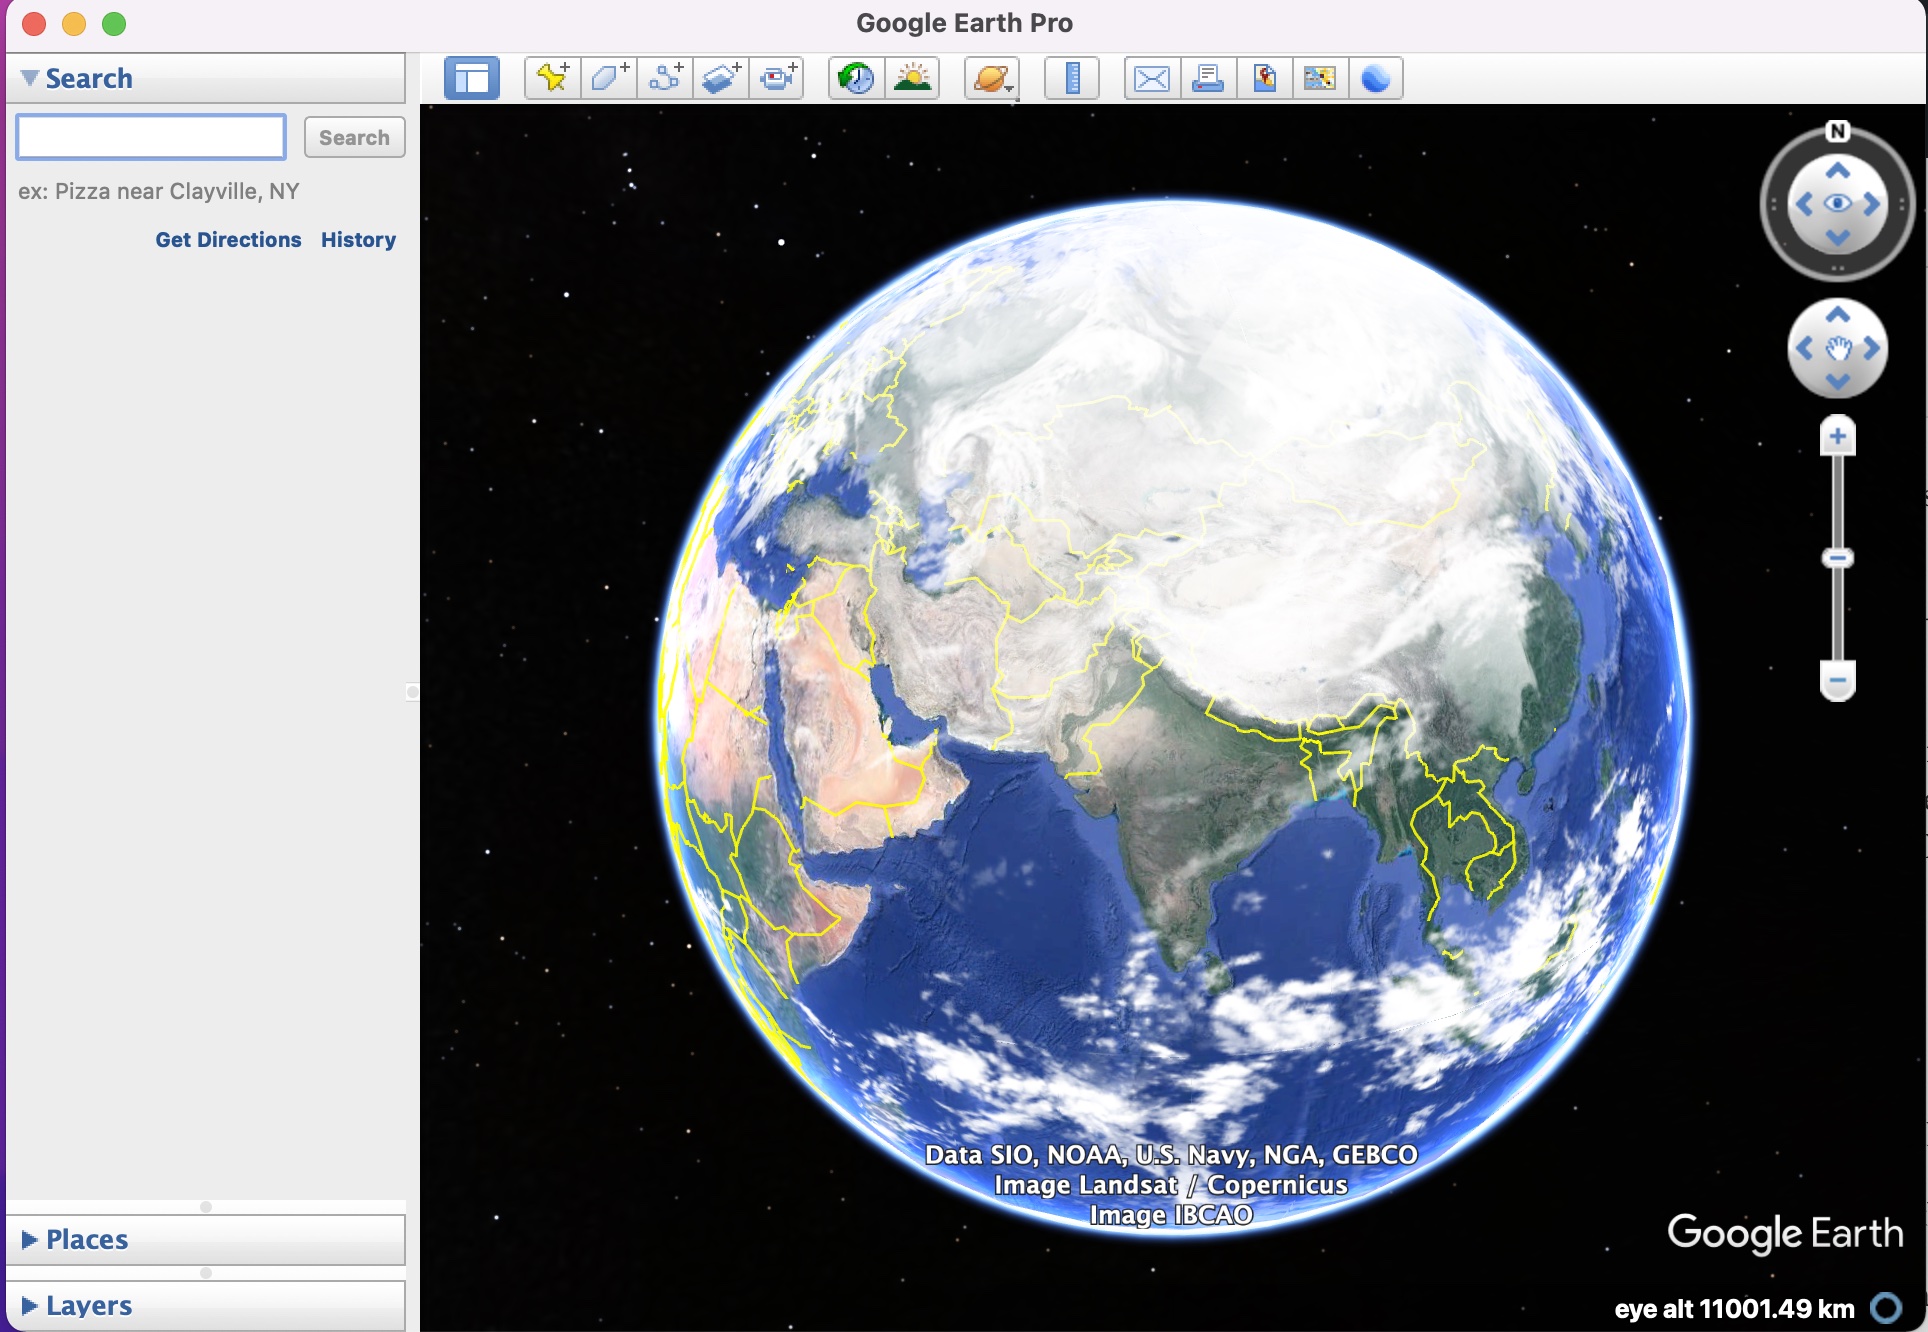 Why is Antarctica blurred out on Google Earth